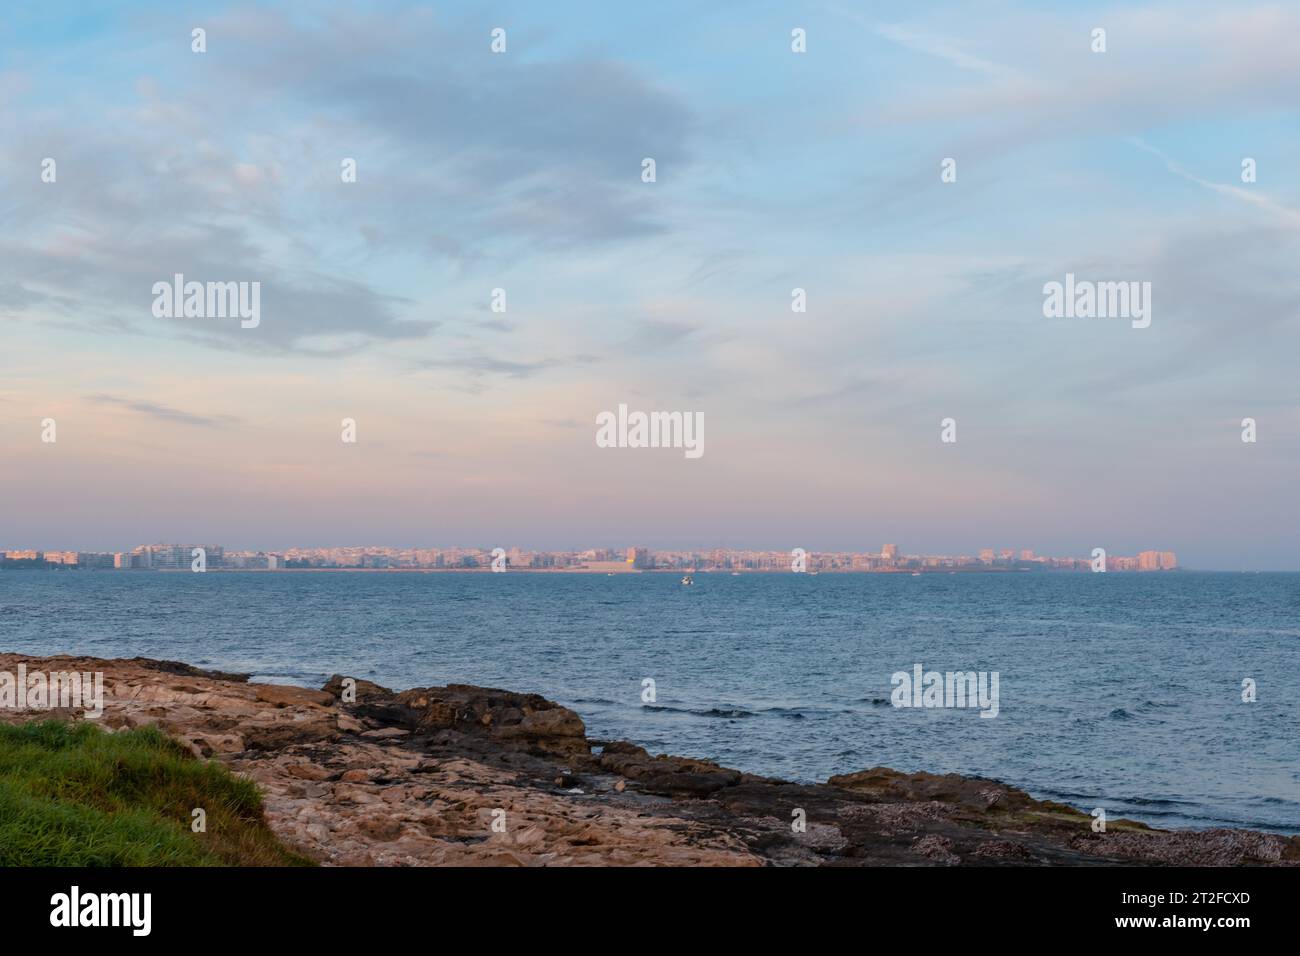 View of the coastal town of Torrevieja from Cala Ferris at sunset, Alicante, Valencian Community. Spain, Mediterranean Sea Stock Photo